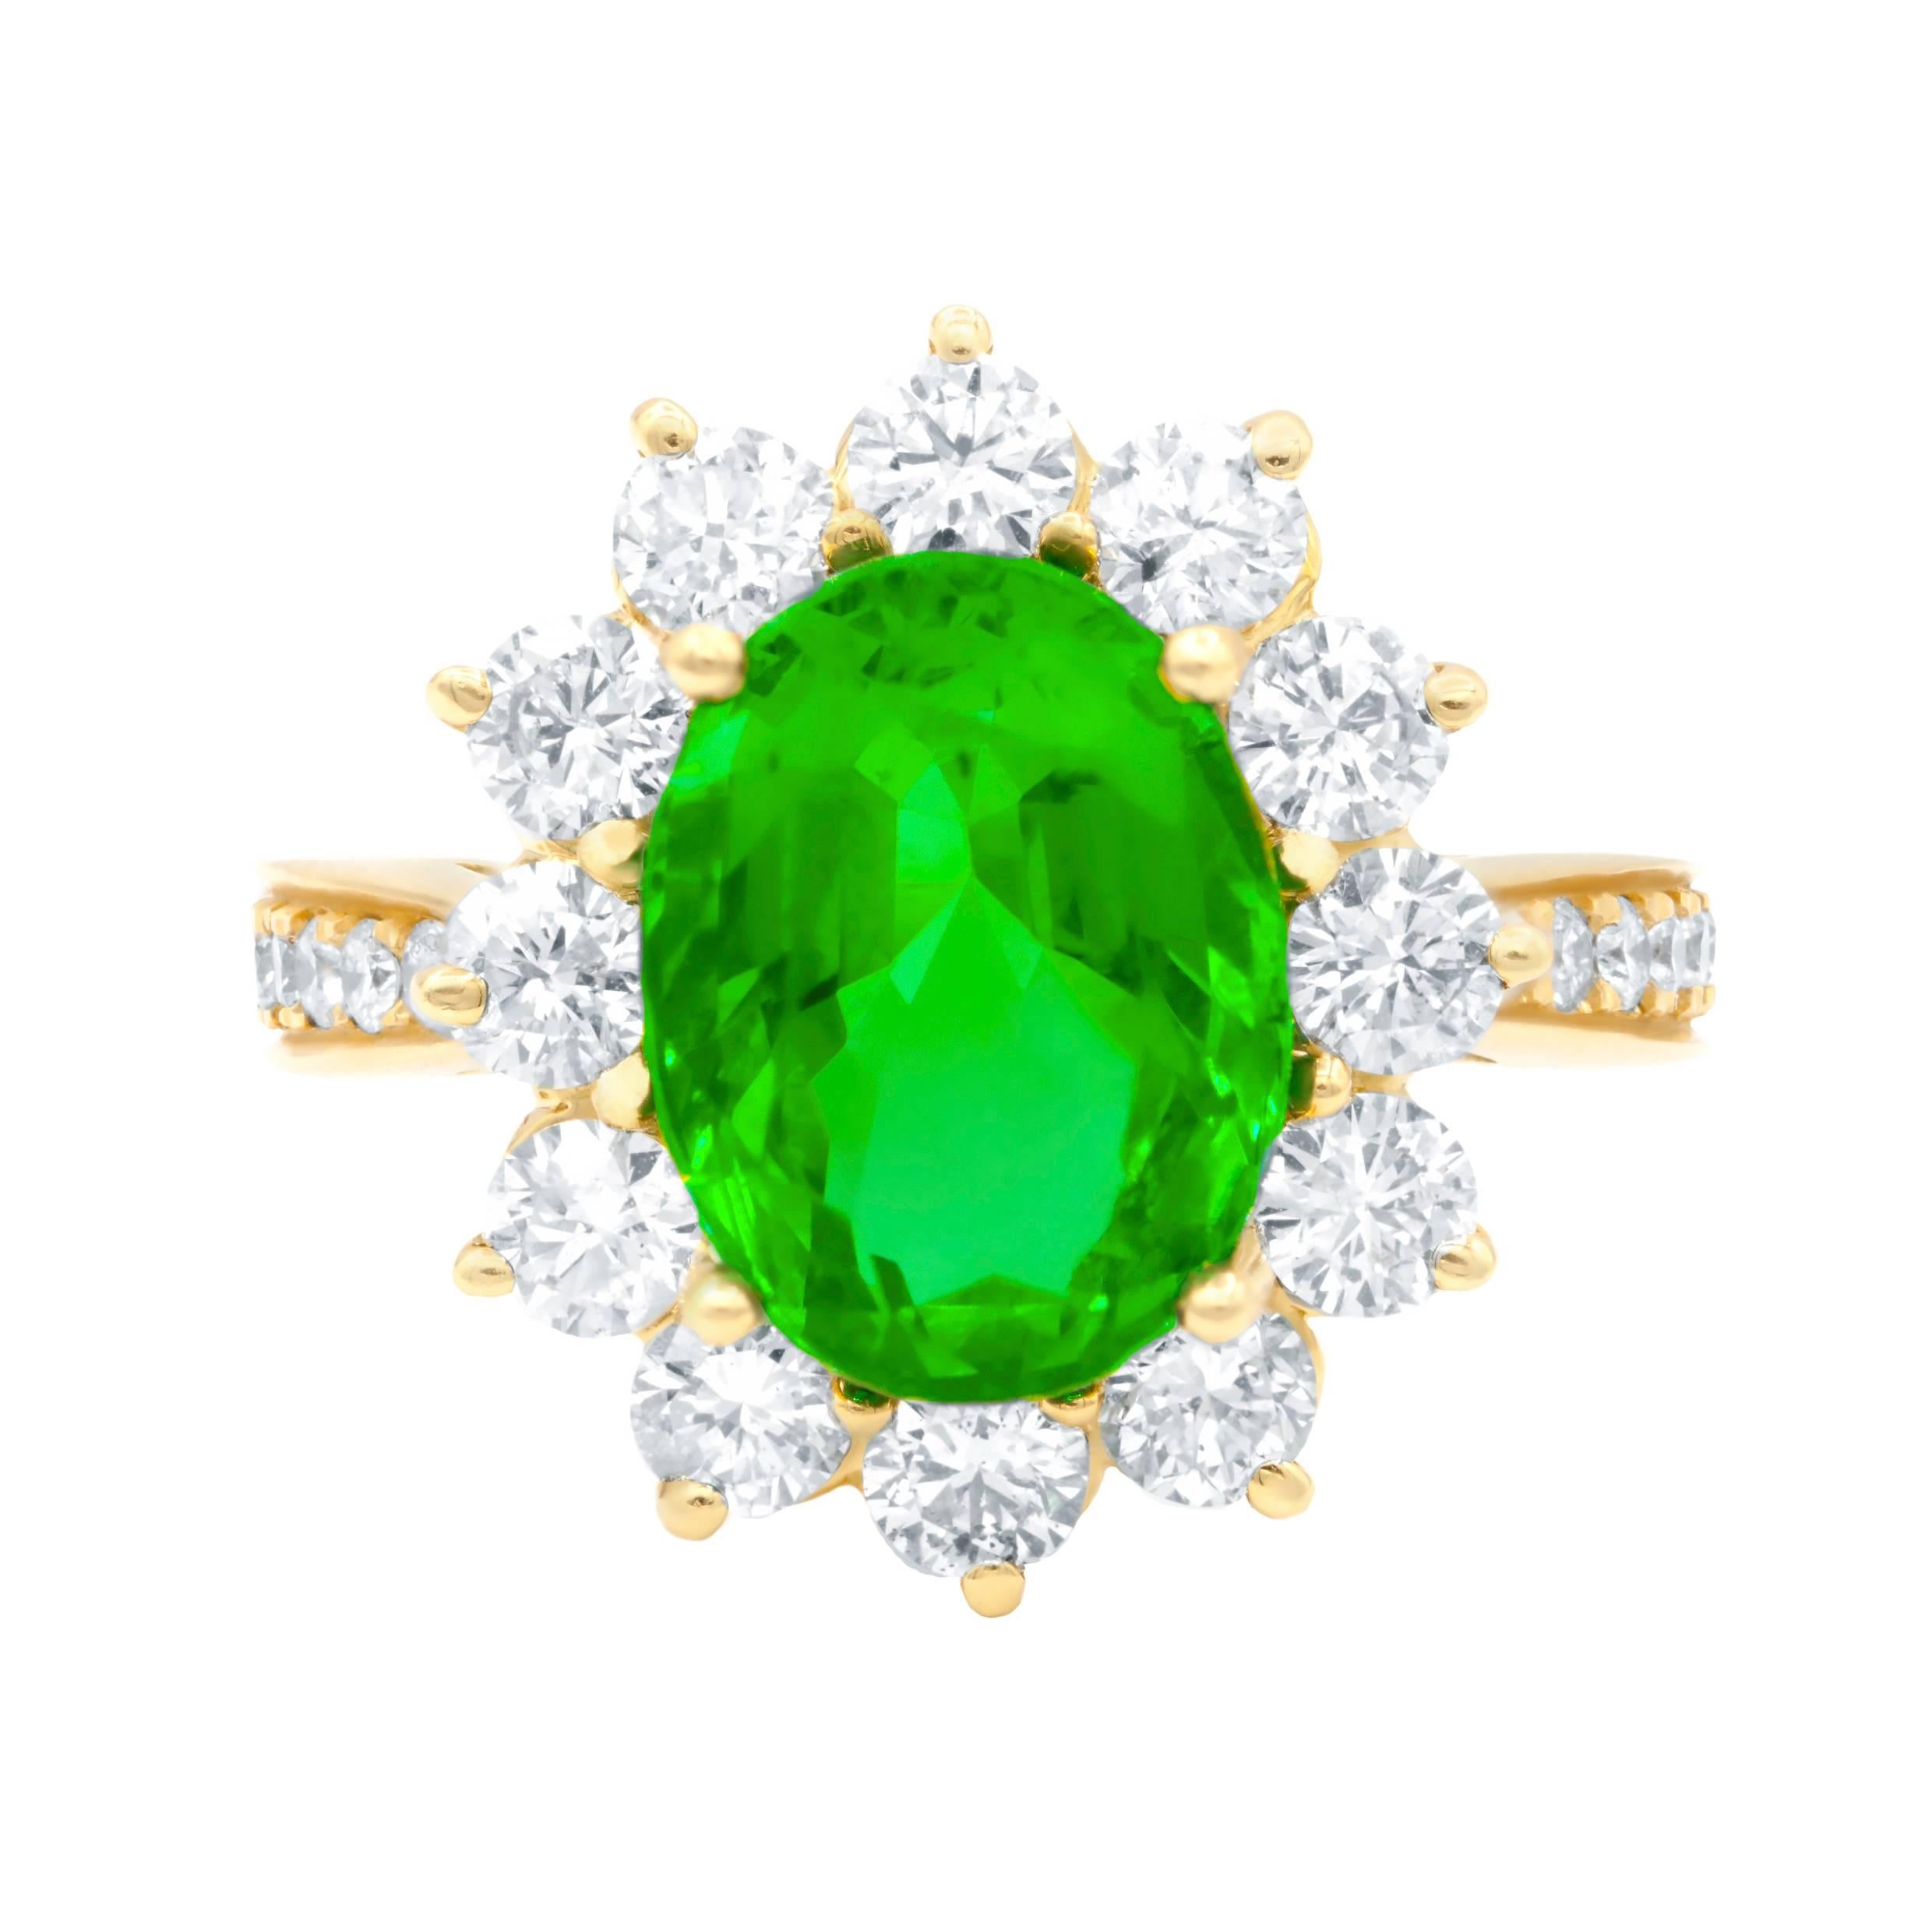 This beautiful Princess Diana Style 18k Yellow Gold Ring features GIA Certified Gem Quality Bright Color 4.20 Carats Oval Shaped Green Emerald in Halo by Round Diamonds and Side Diamonds in 1.80 Carats of Total Diamond Weight comes in size 7. 